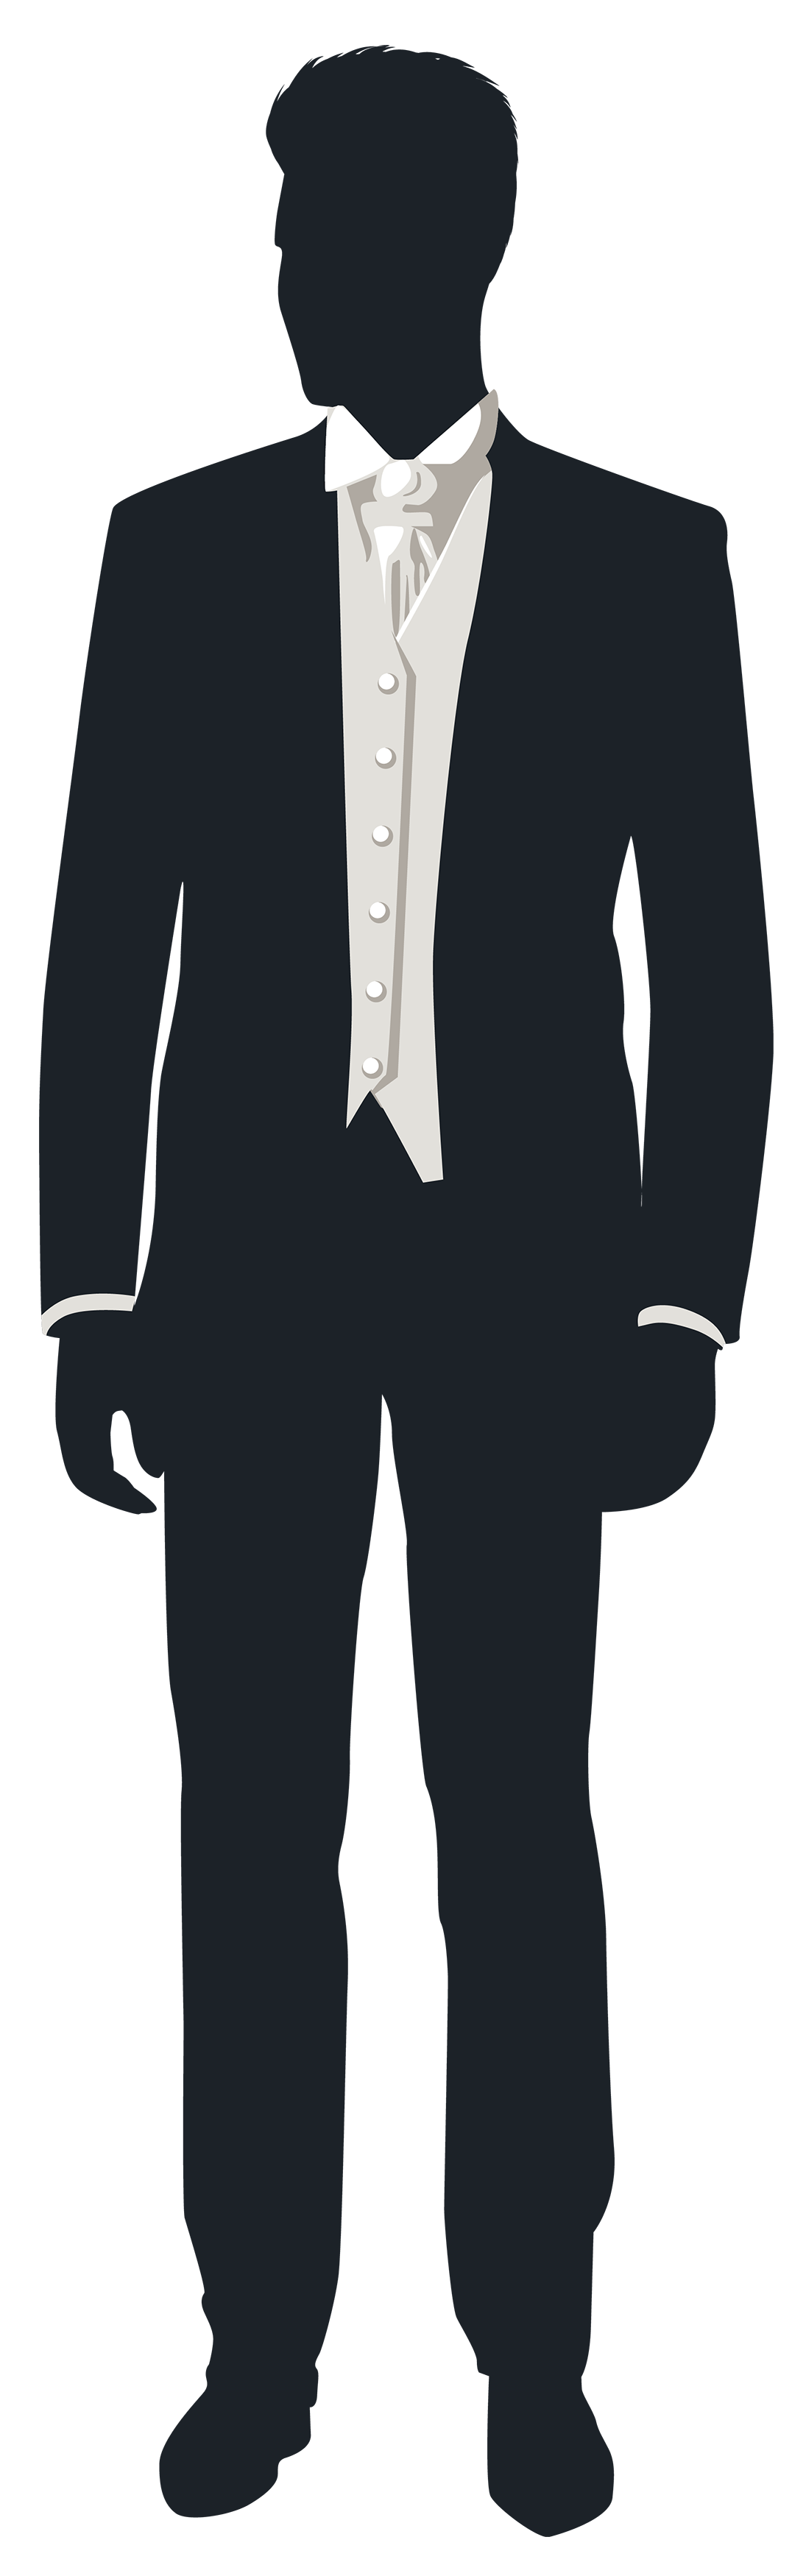 Groom png clipart